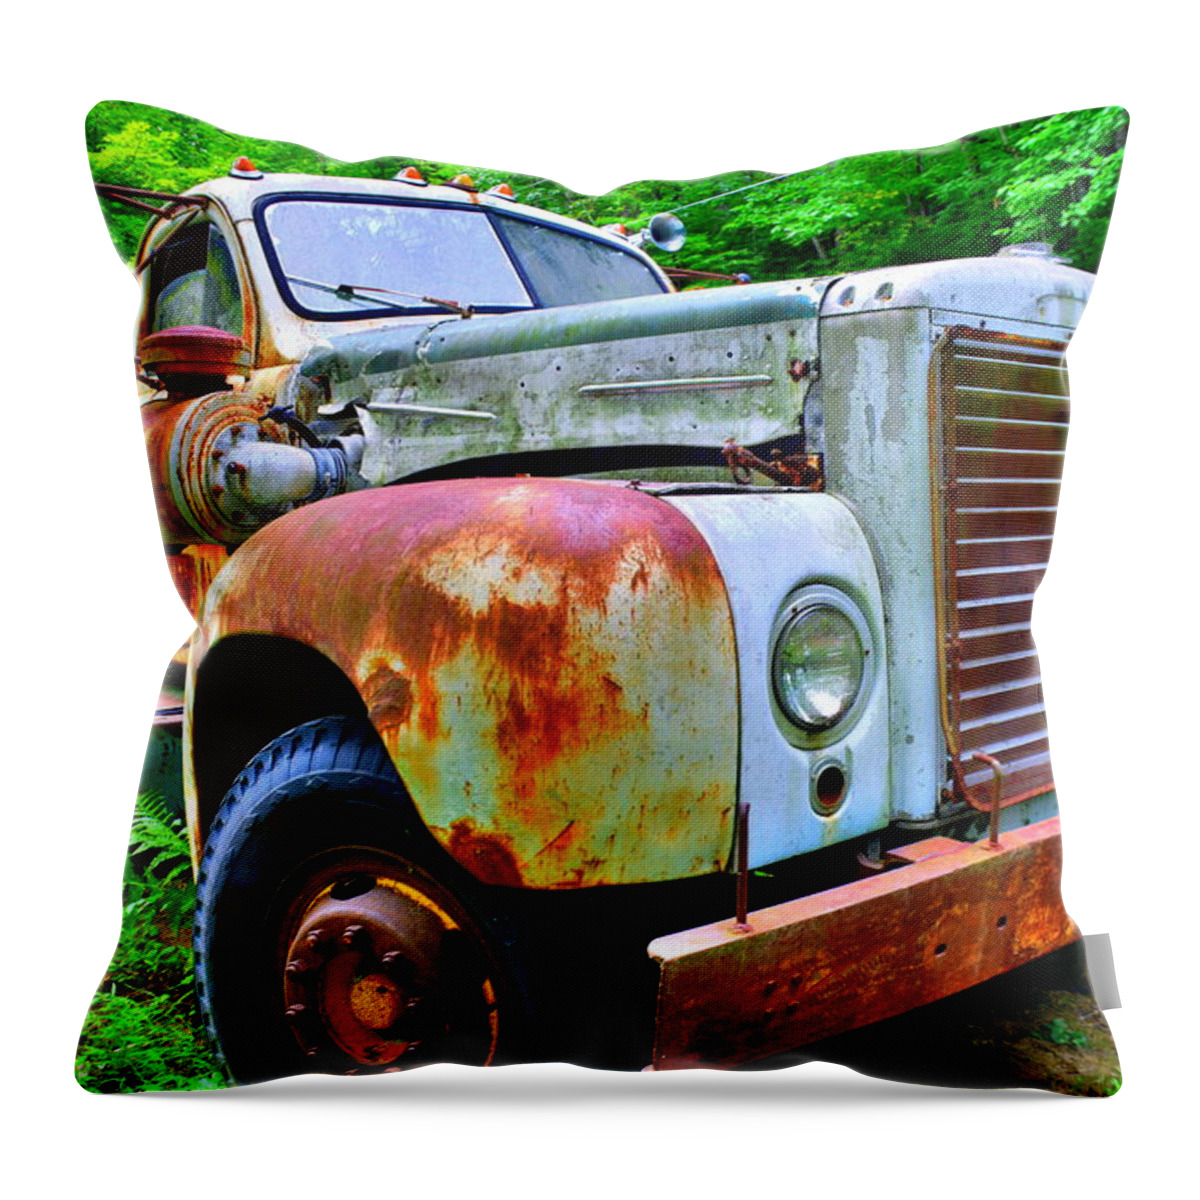 Rusty Old Truck Throw Pillow featuring the photograph Rusty Old Truck by Lisa Wooten